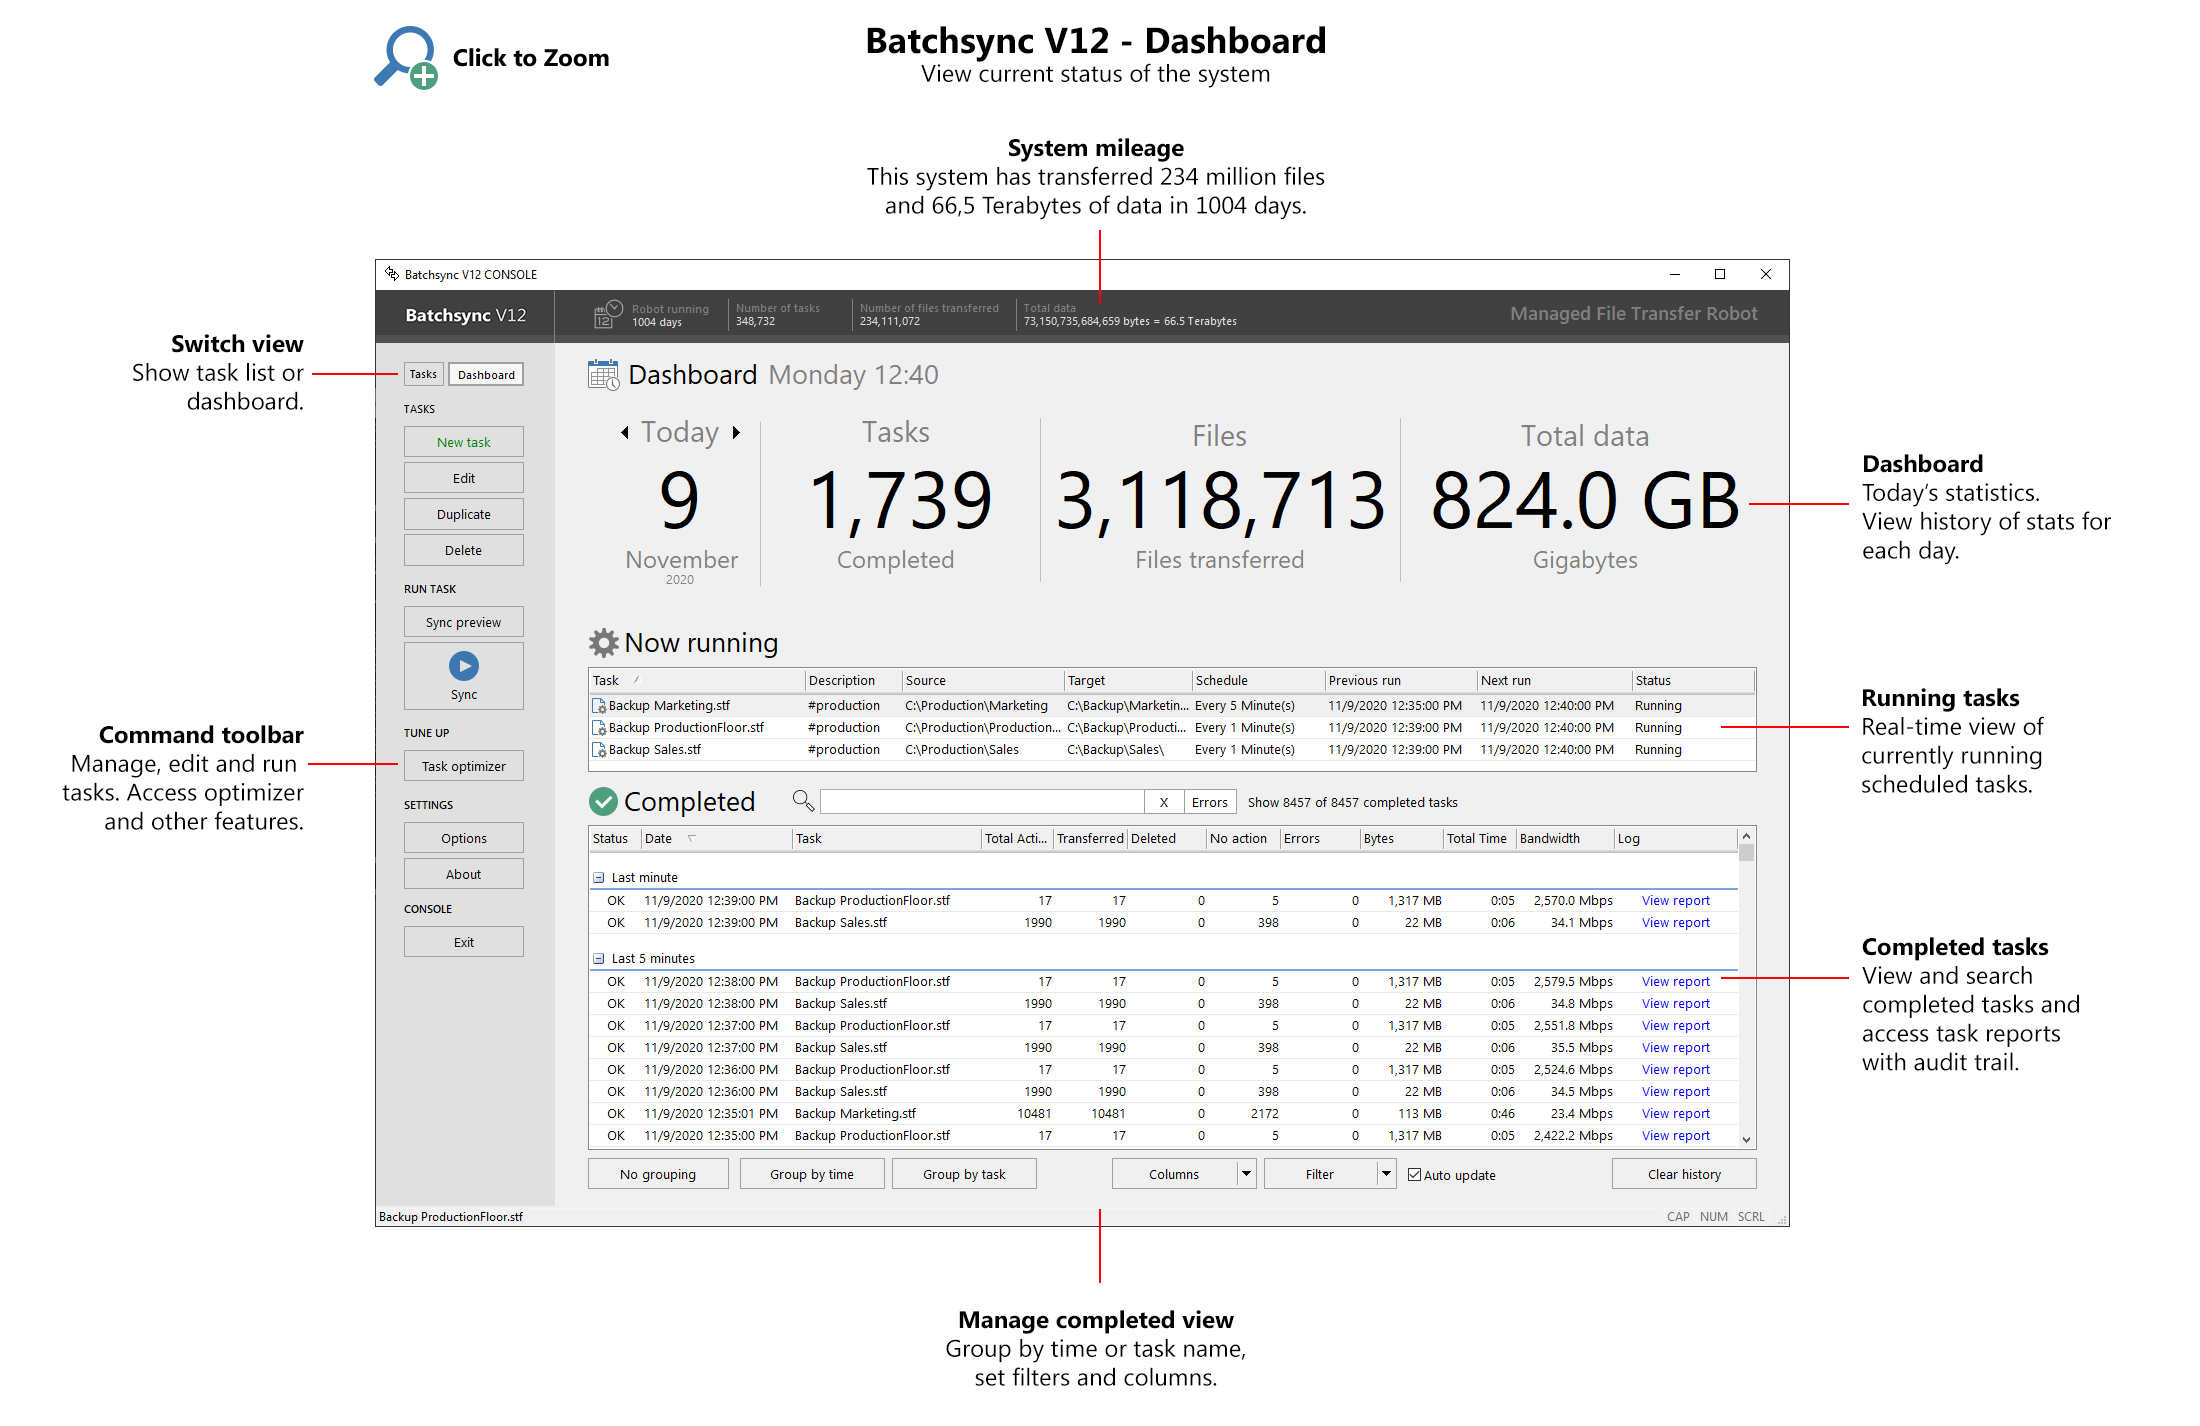 Click to Zoom: Dashboard - View current status of the system